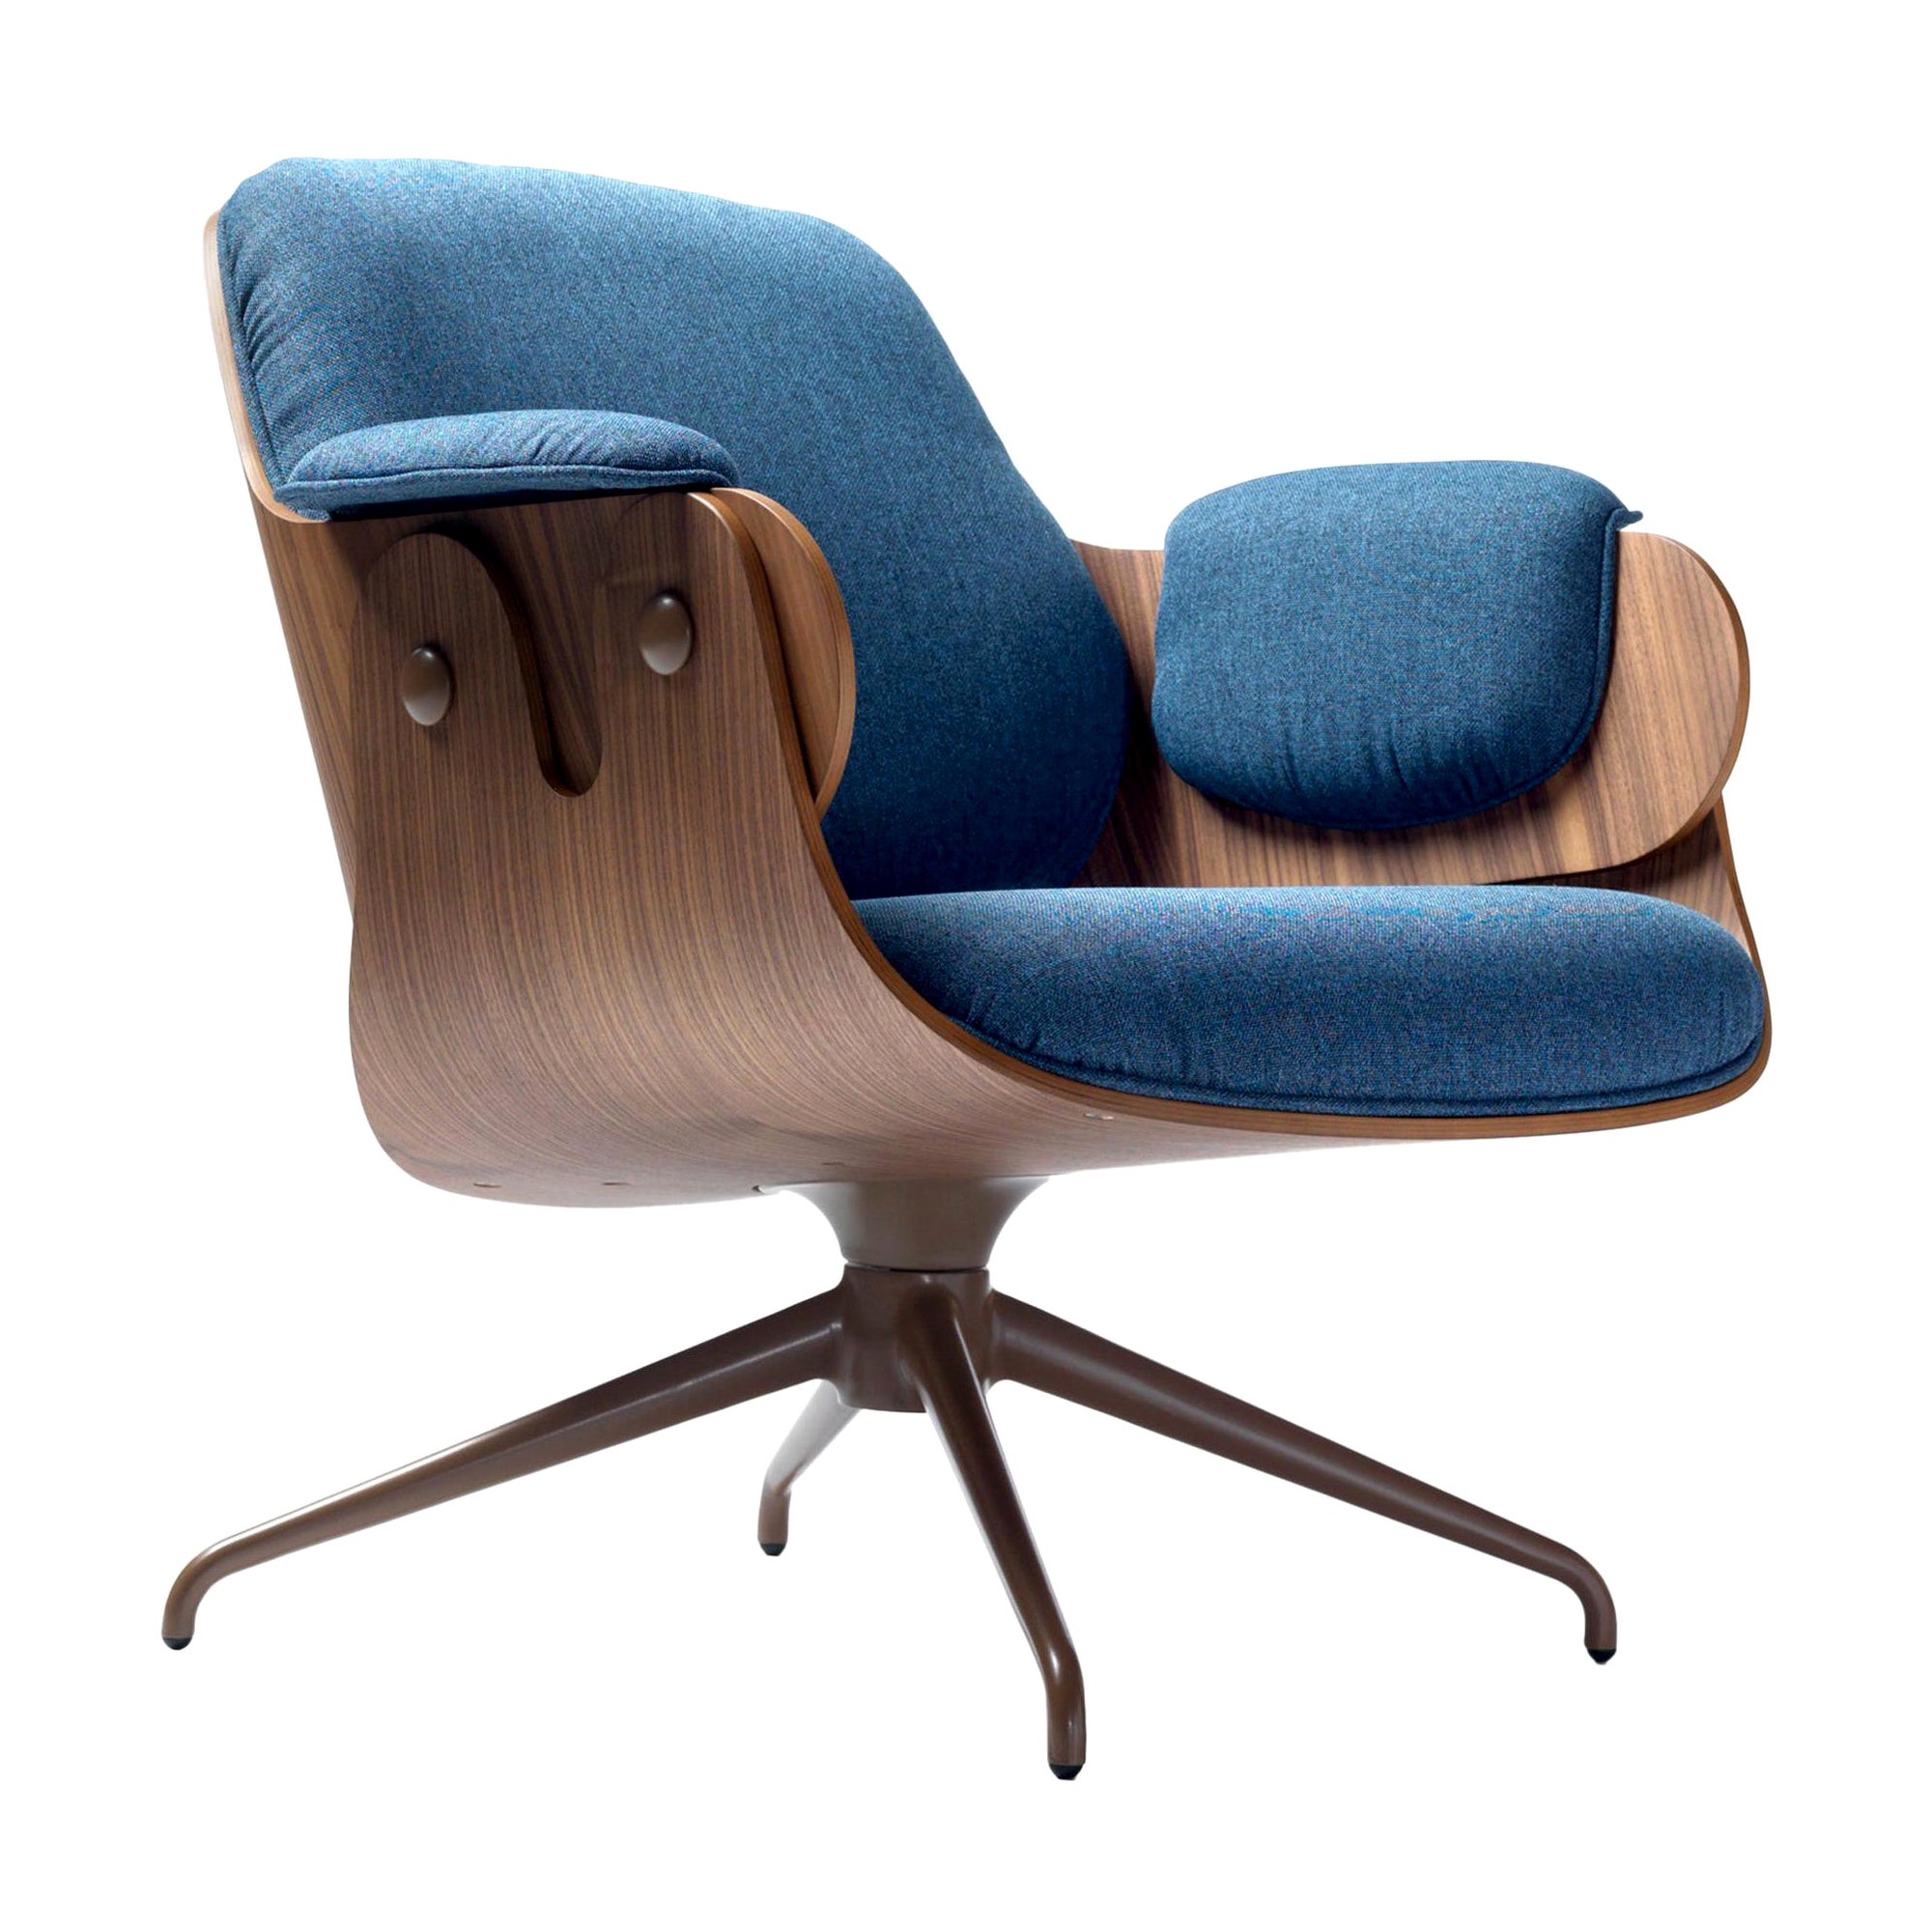 Jaime Hayon, Contemporary, Walnut, Blue Upholstery Low Lounger Armchair (fauteuil bas)